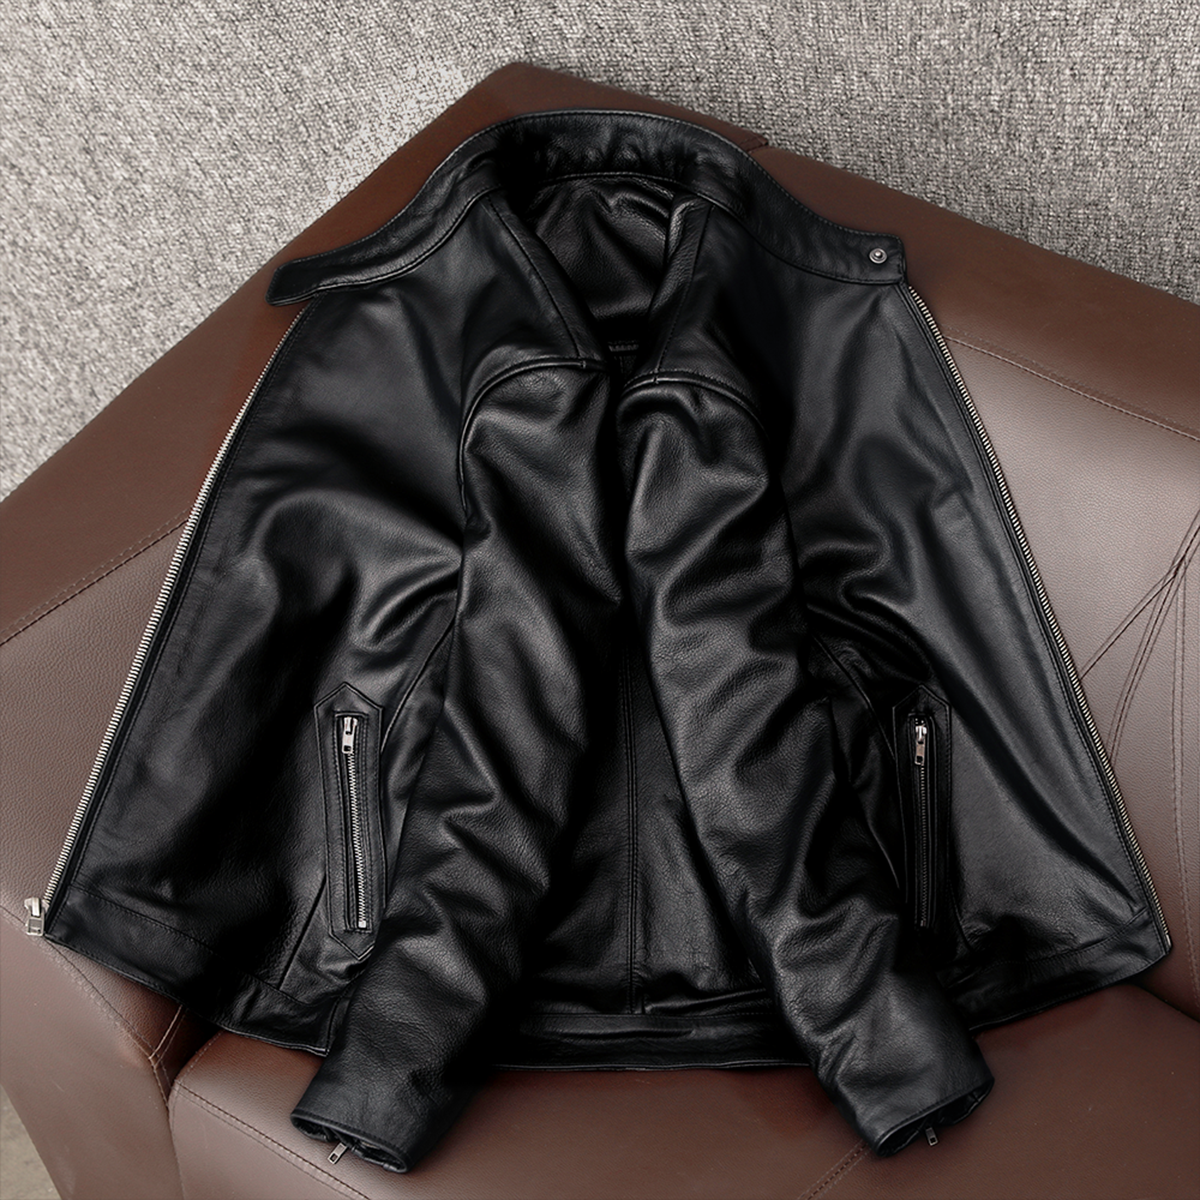 Casual Black Motorcycle Leather Jacket